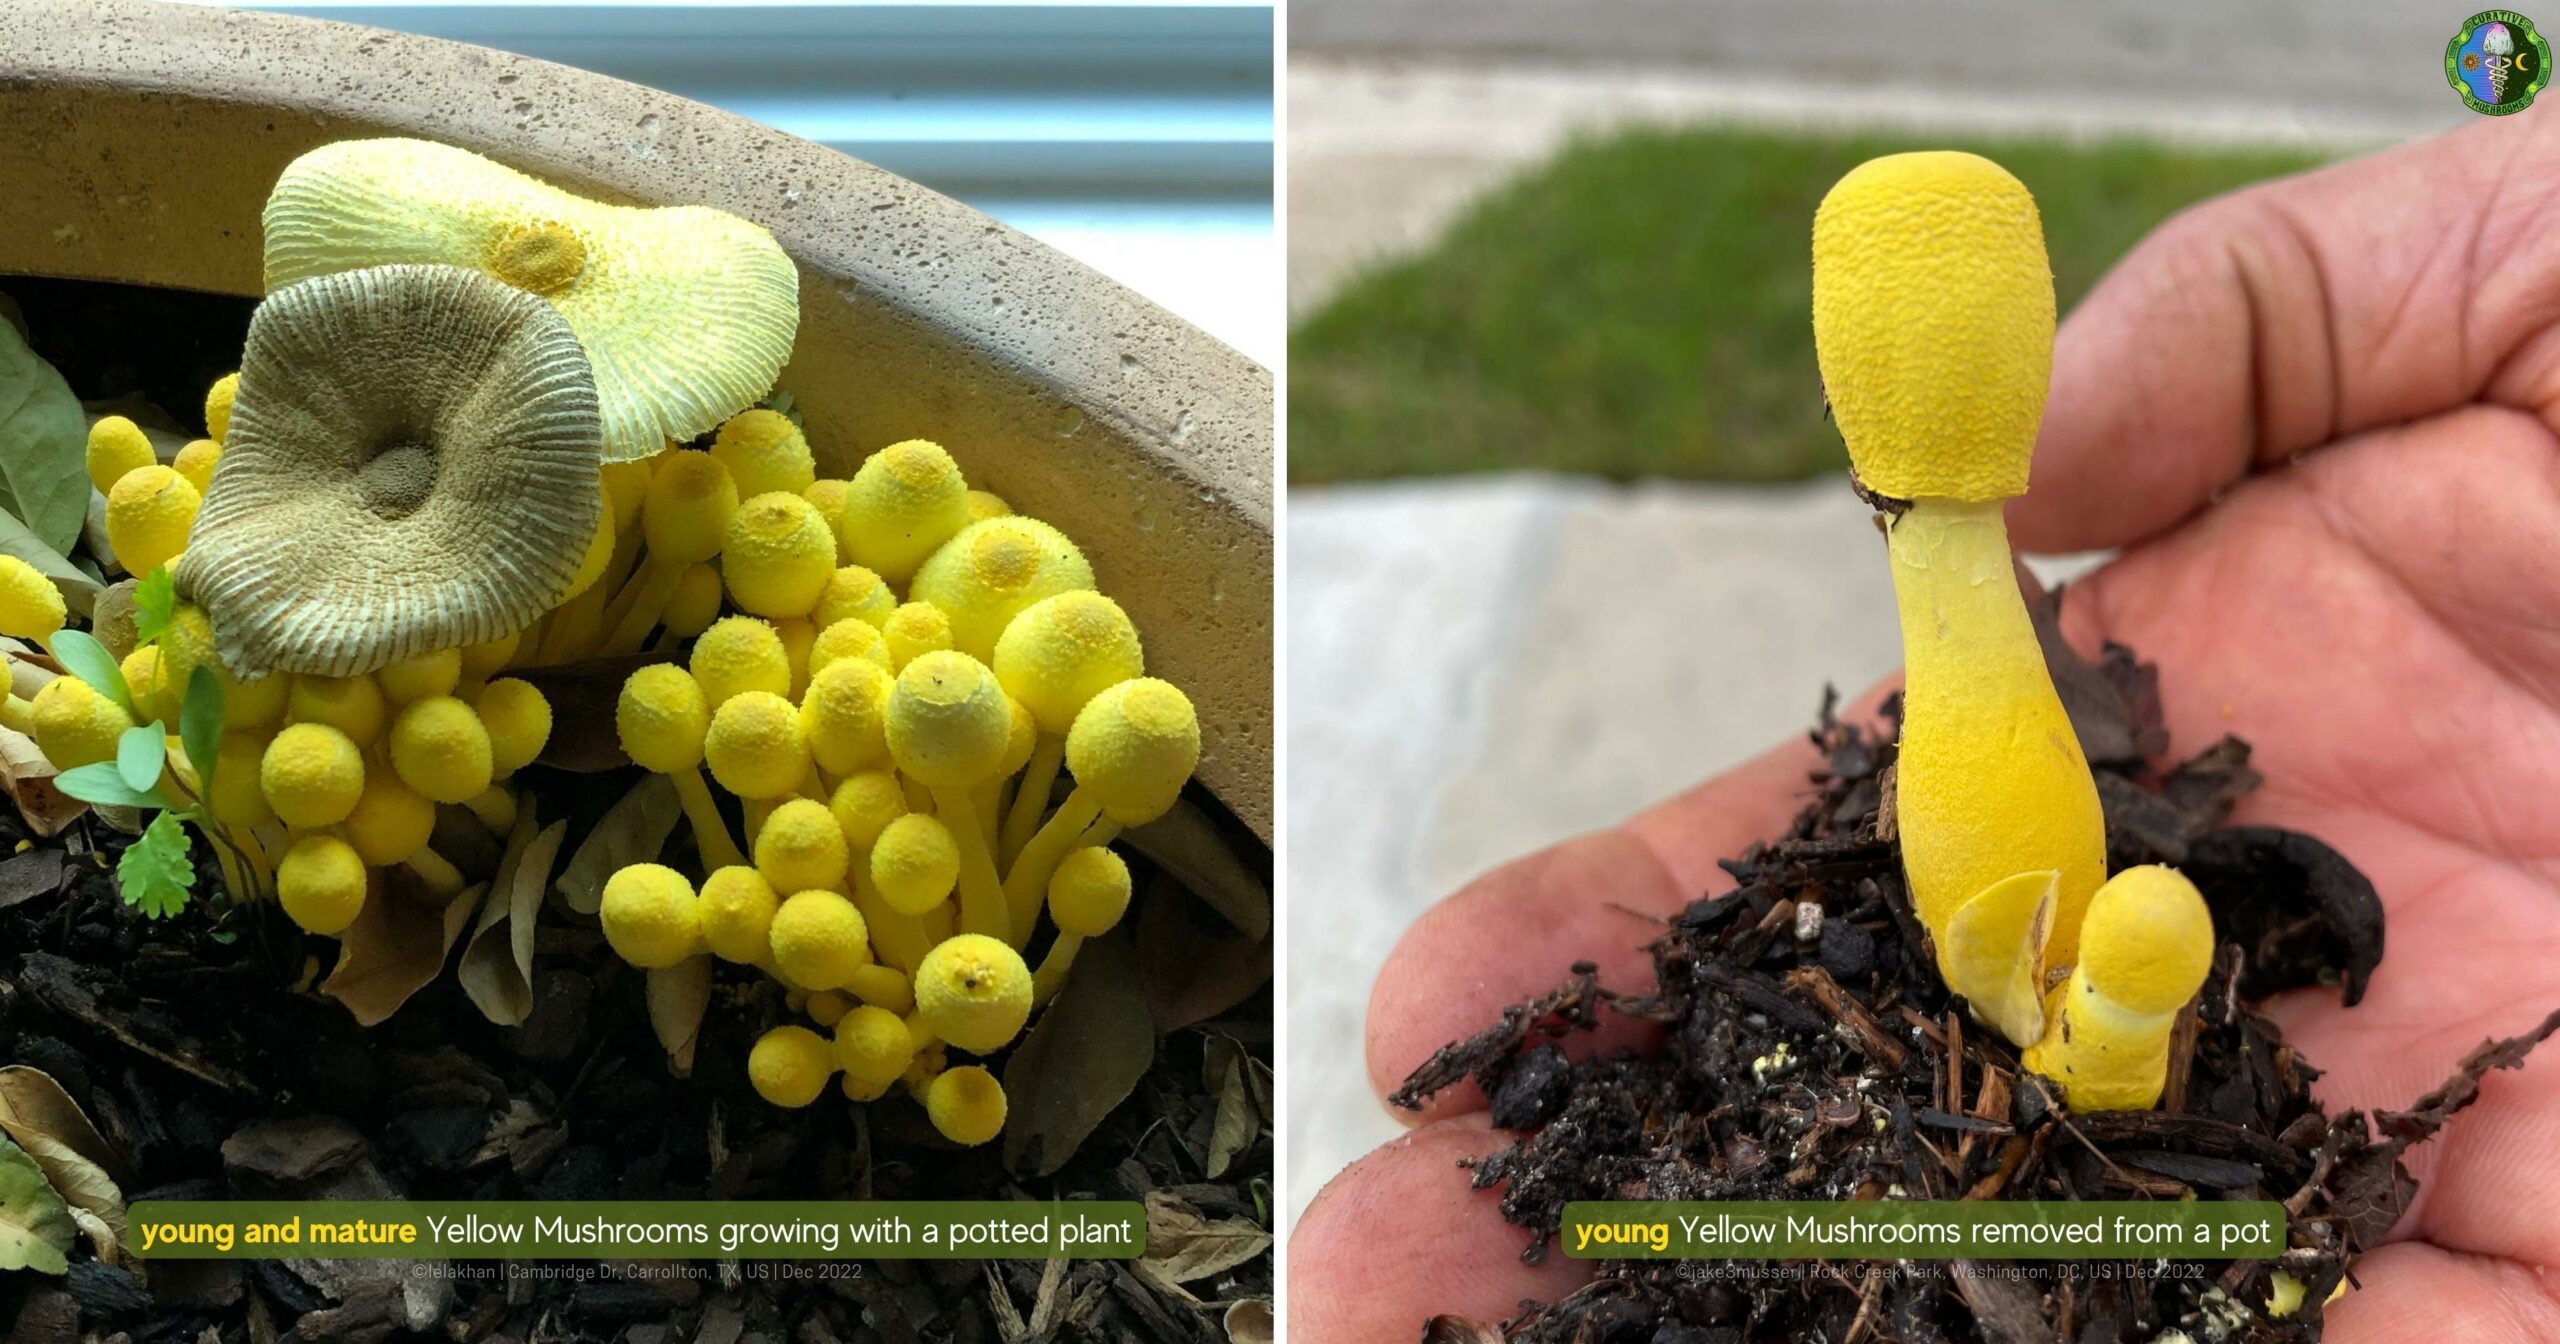 young and mature Yellow Mushrooms growing with a potted plant - young Yellow Mushrooms removed from a pot